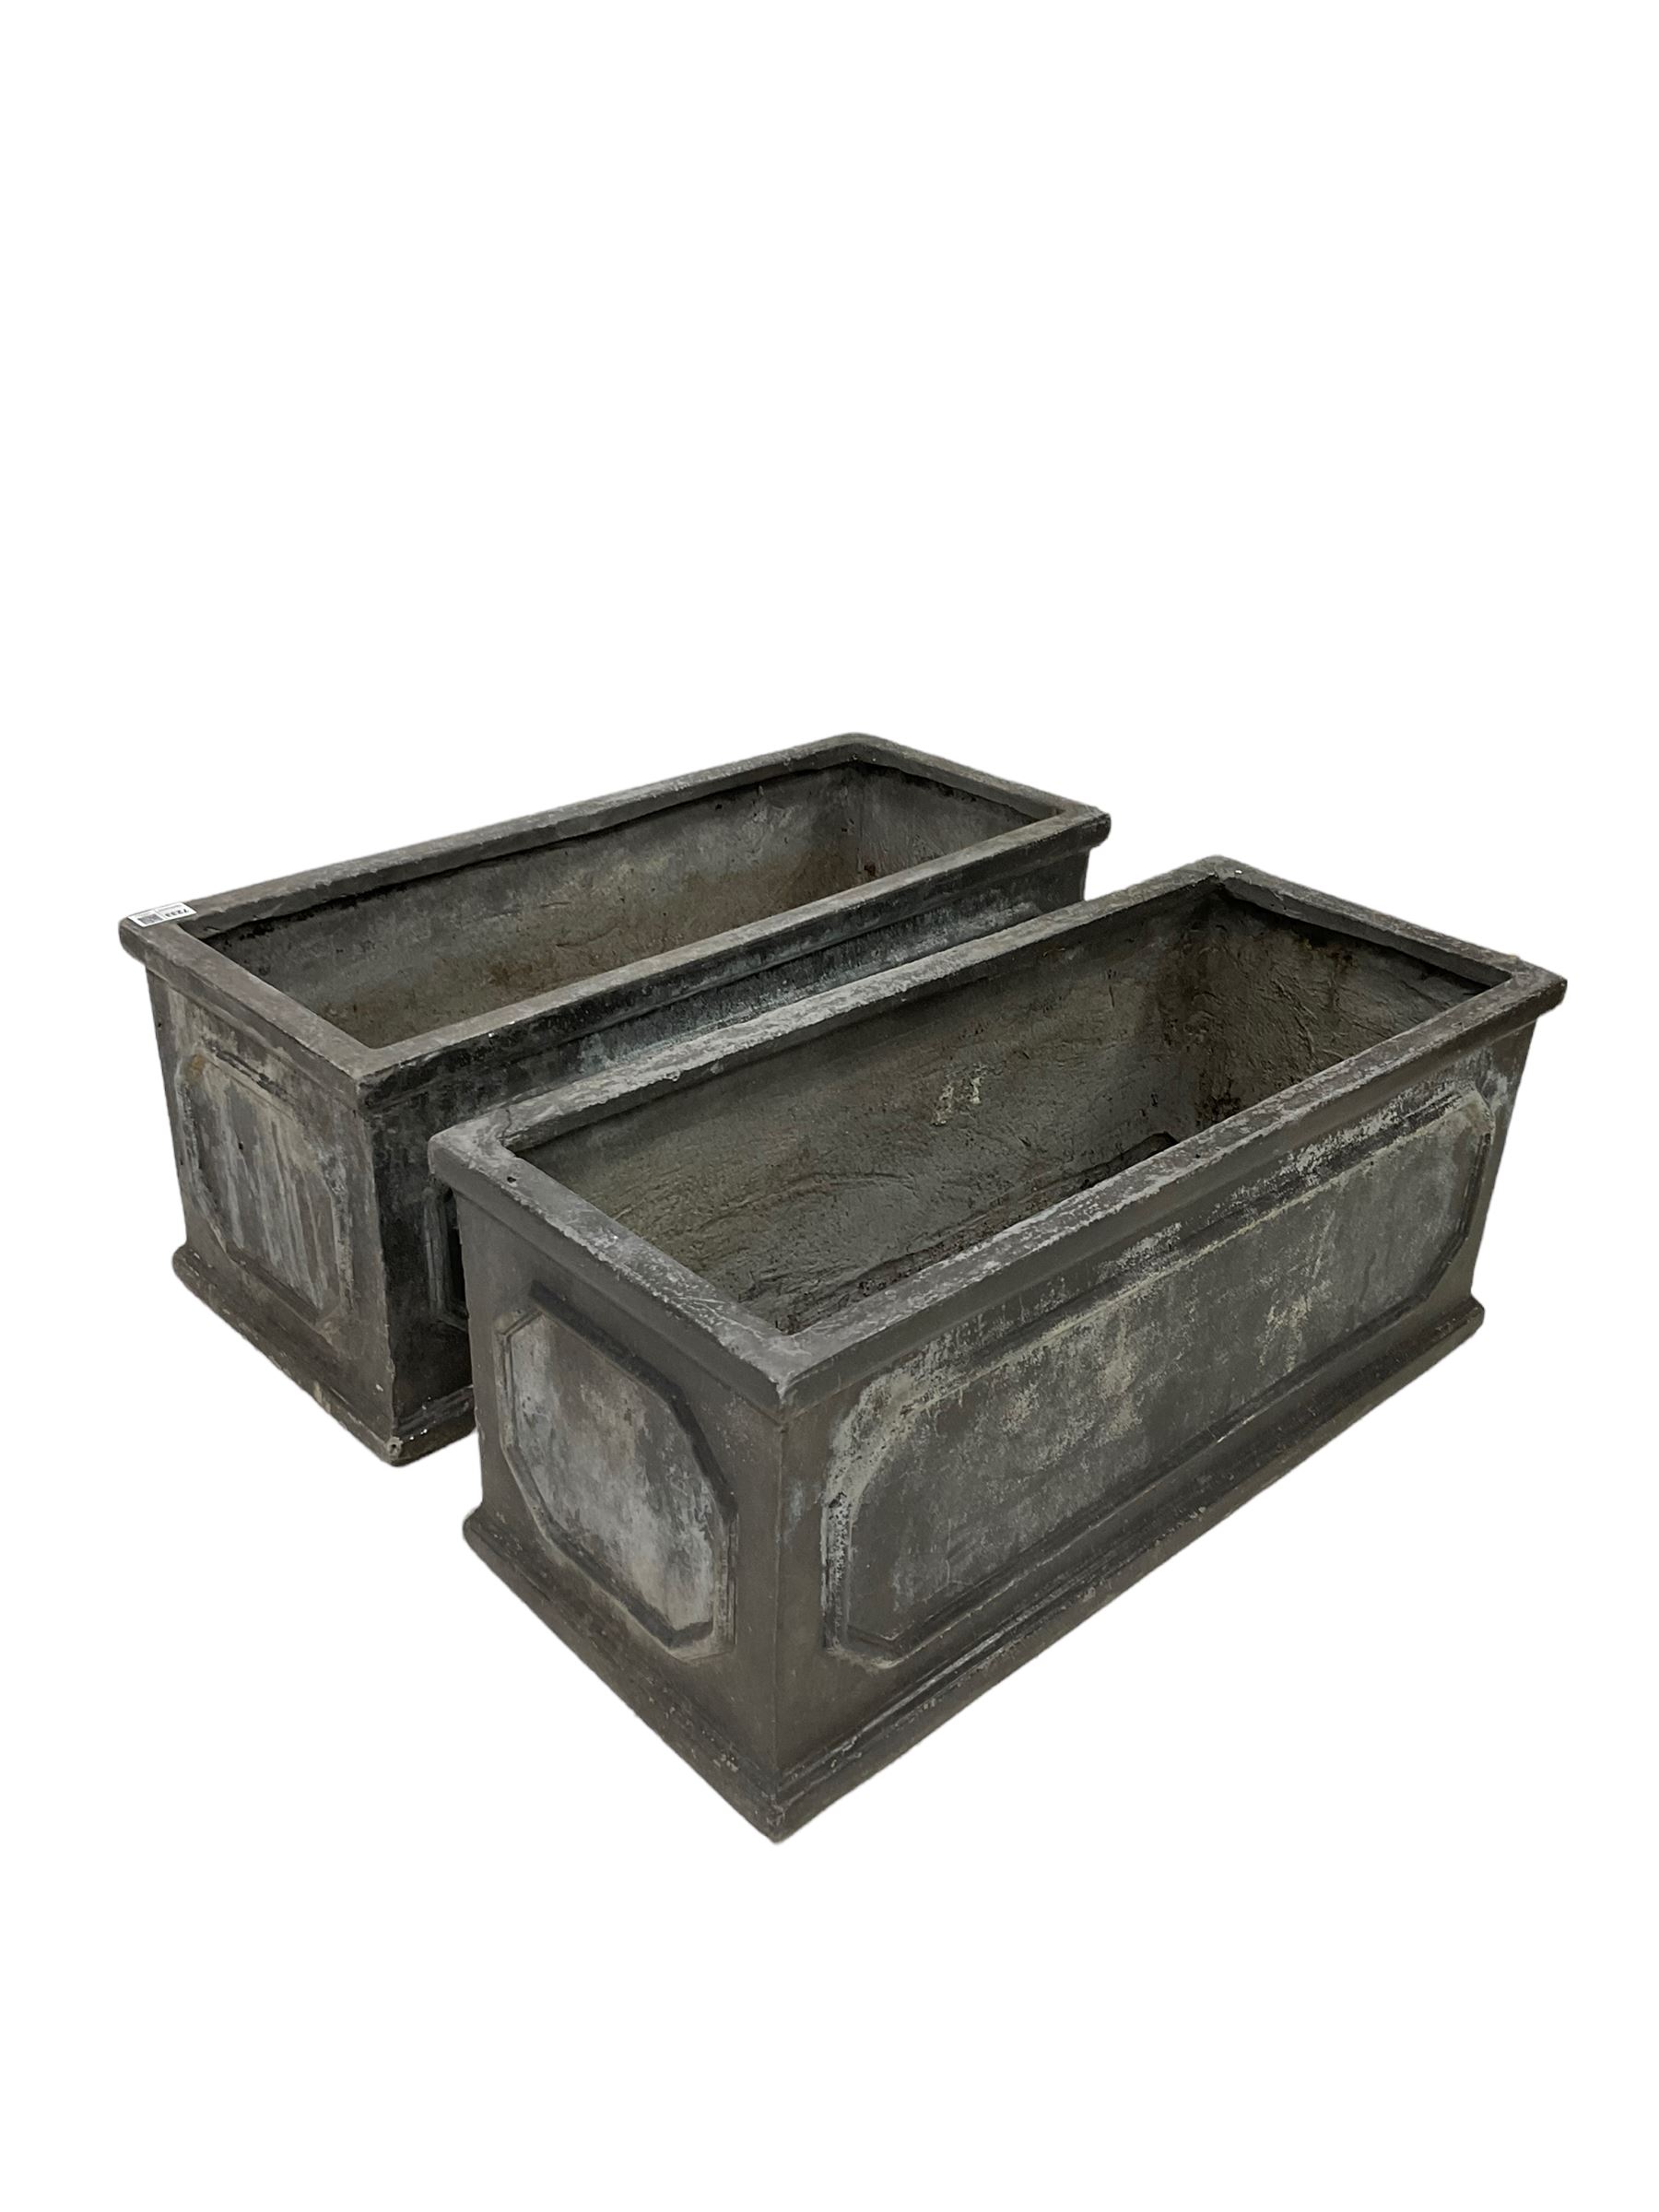 Pair Regency style lead finish garden planters of rectangular form - Image 3 of 3